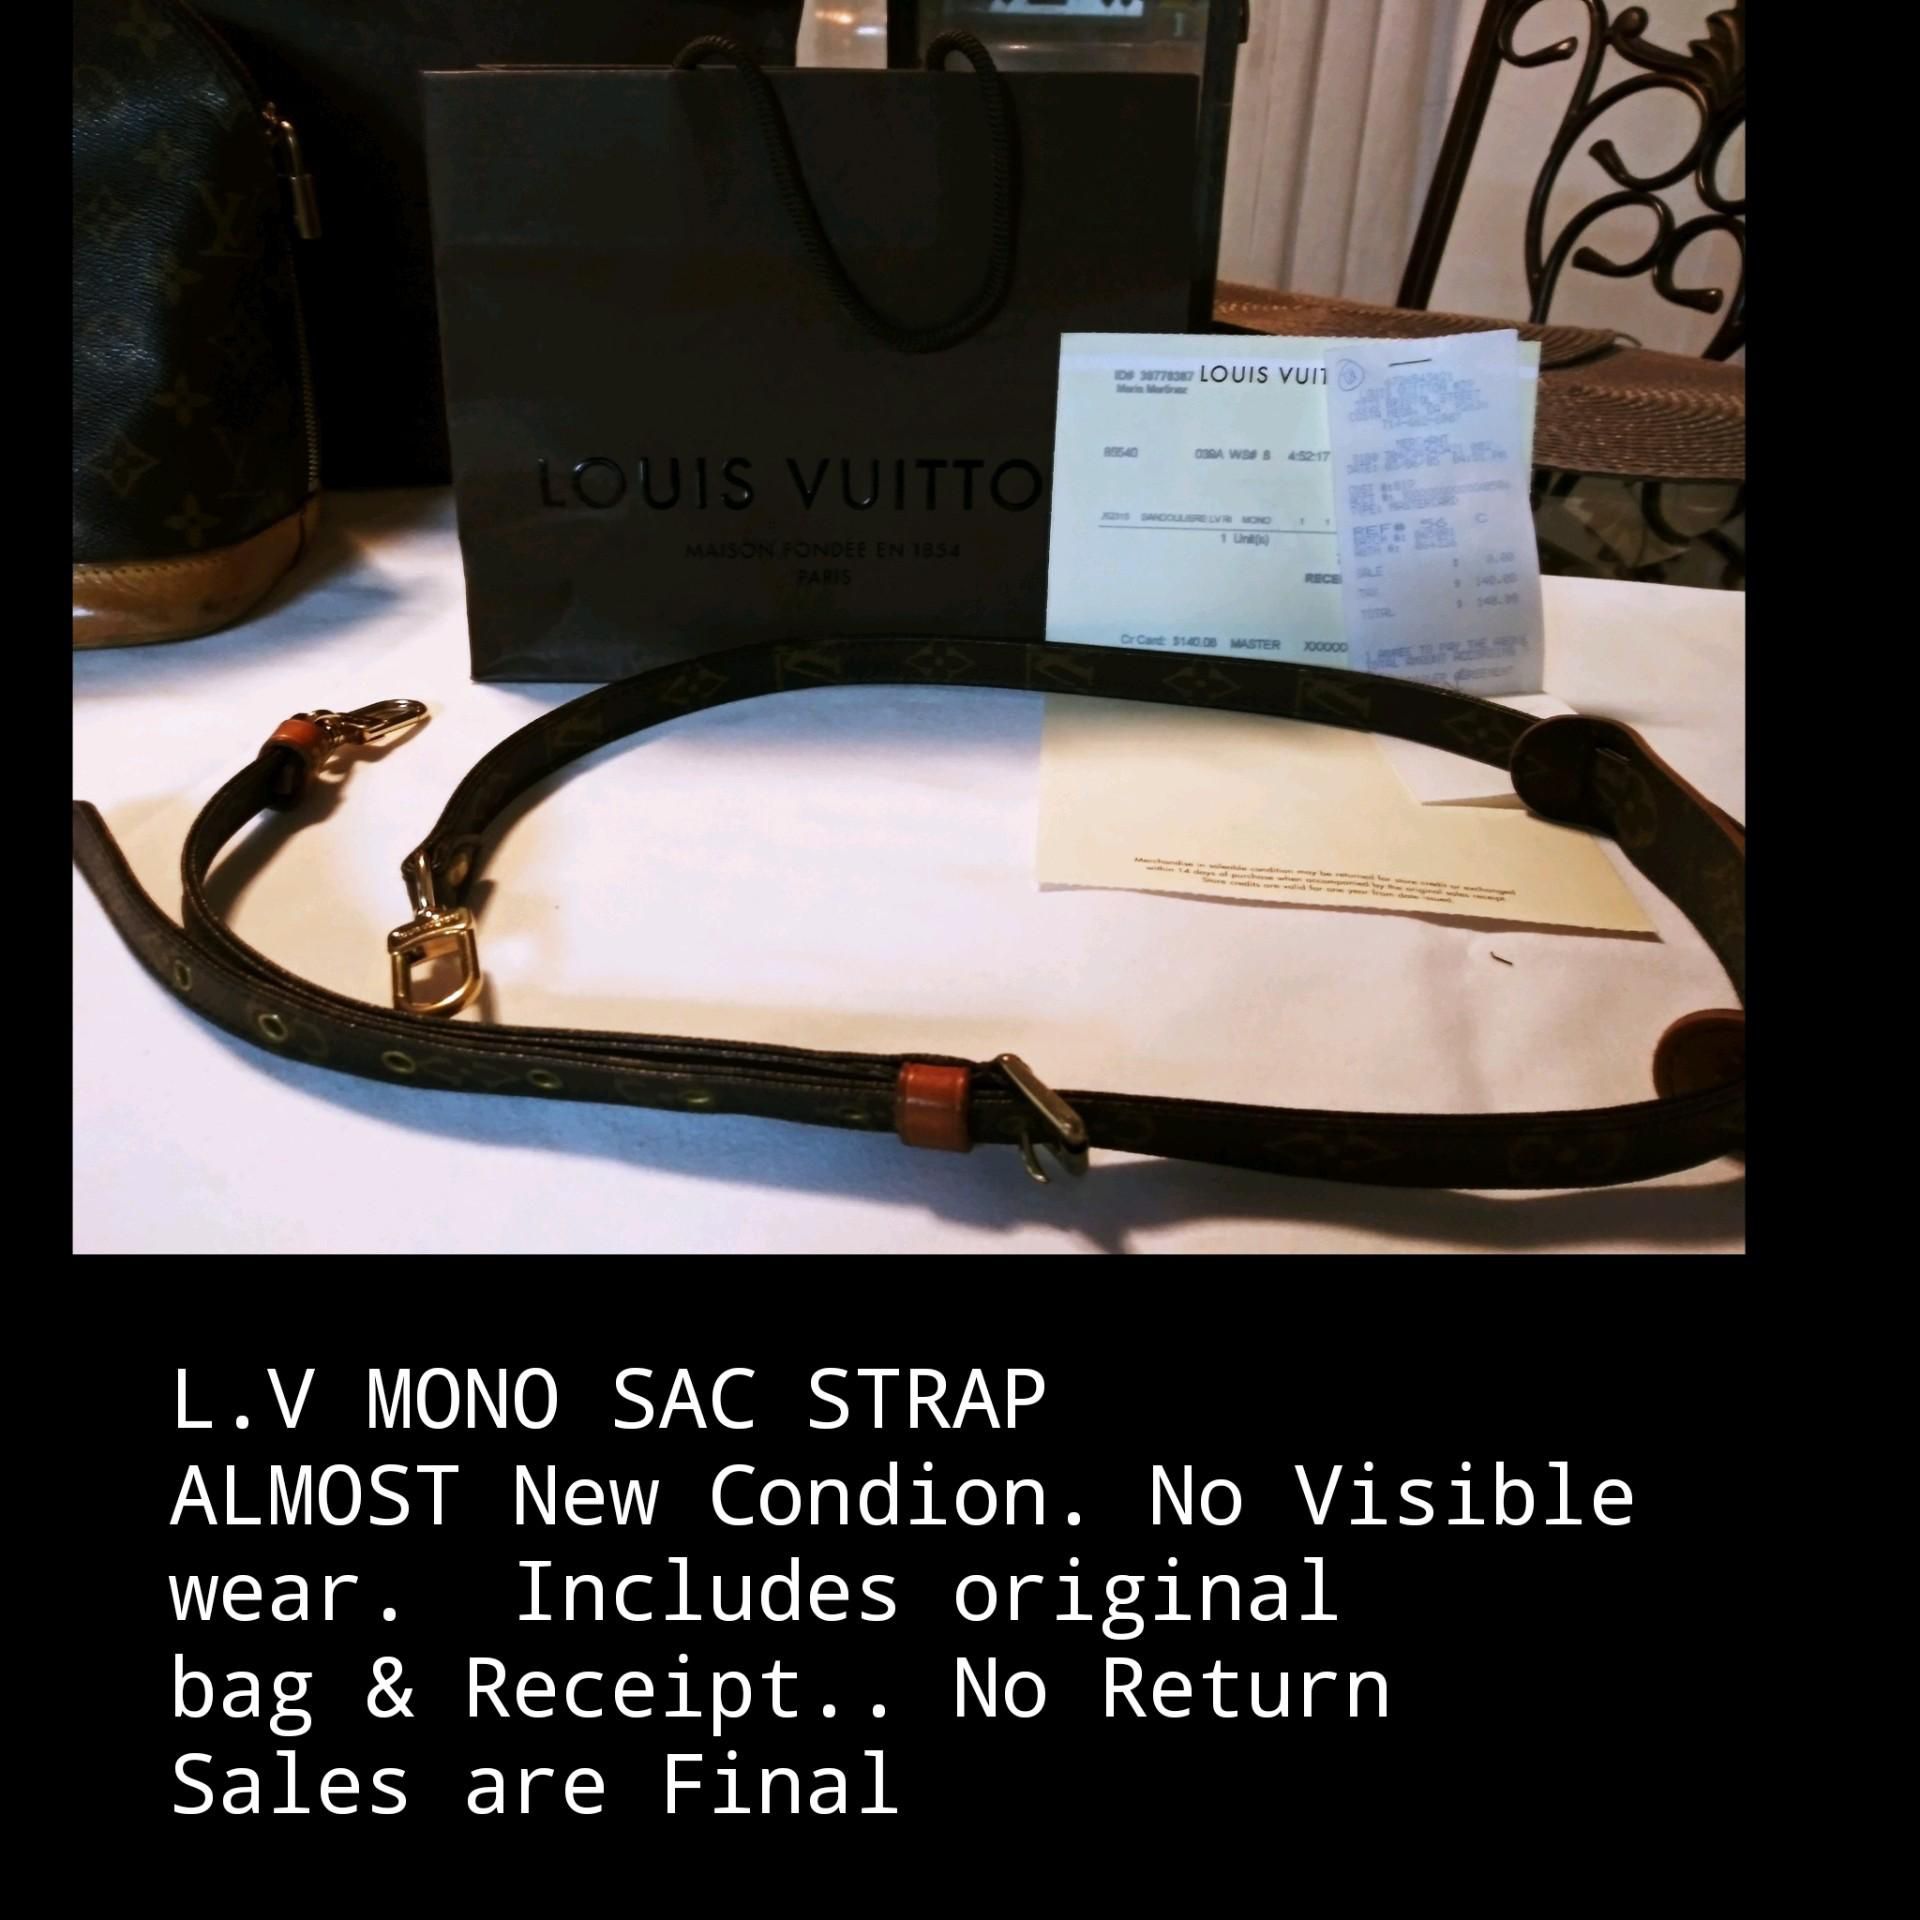 Authentic Louis Vuitton Handbag - Only Strap Needs Repair for Sale in Dana  Point, CA - OfferUp